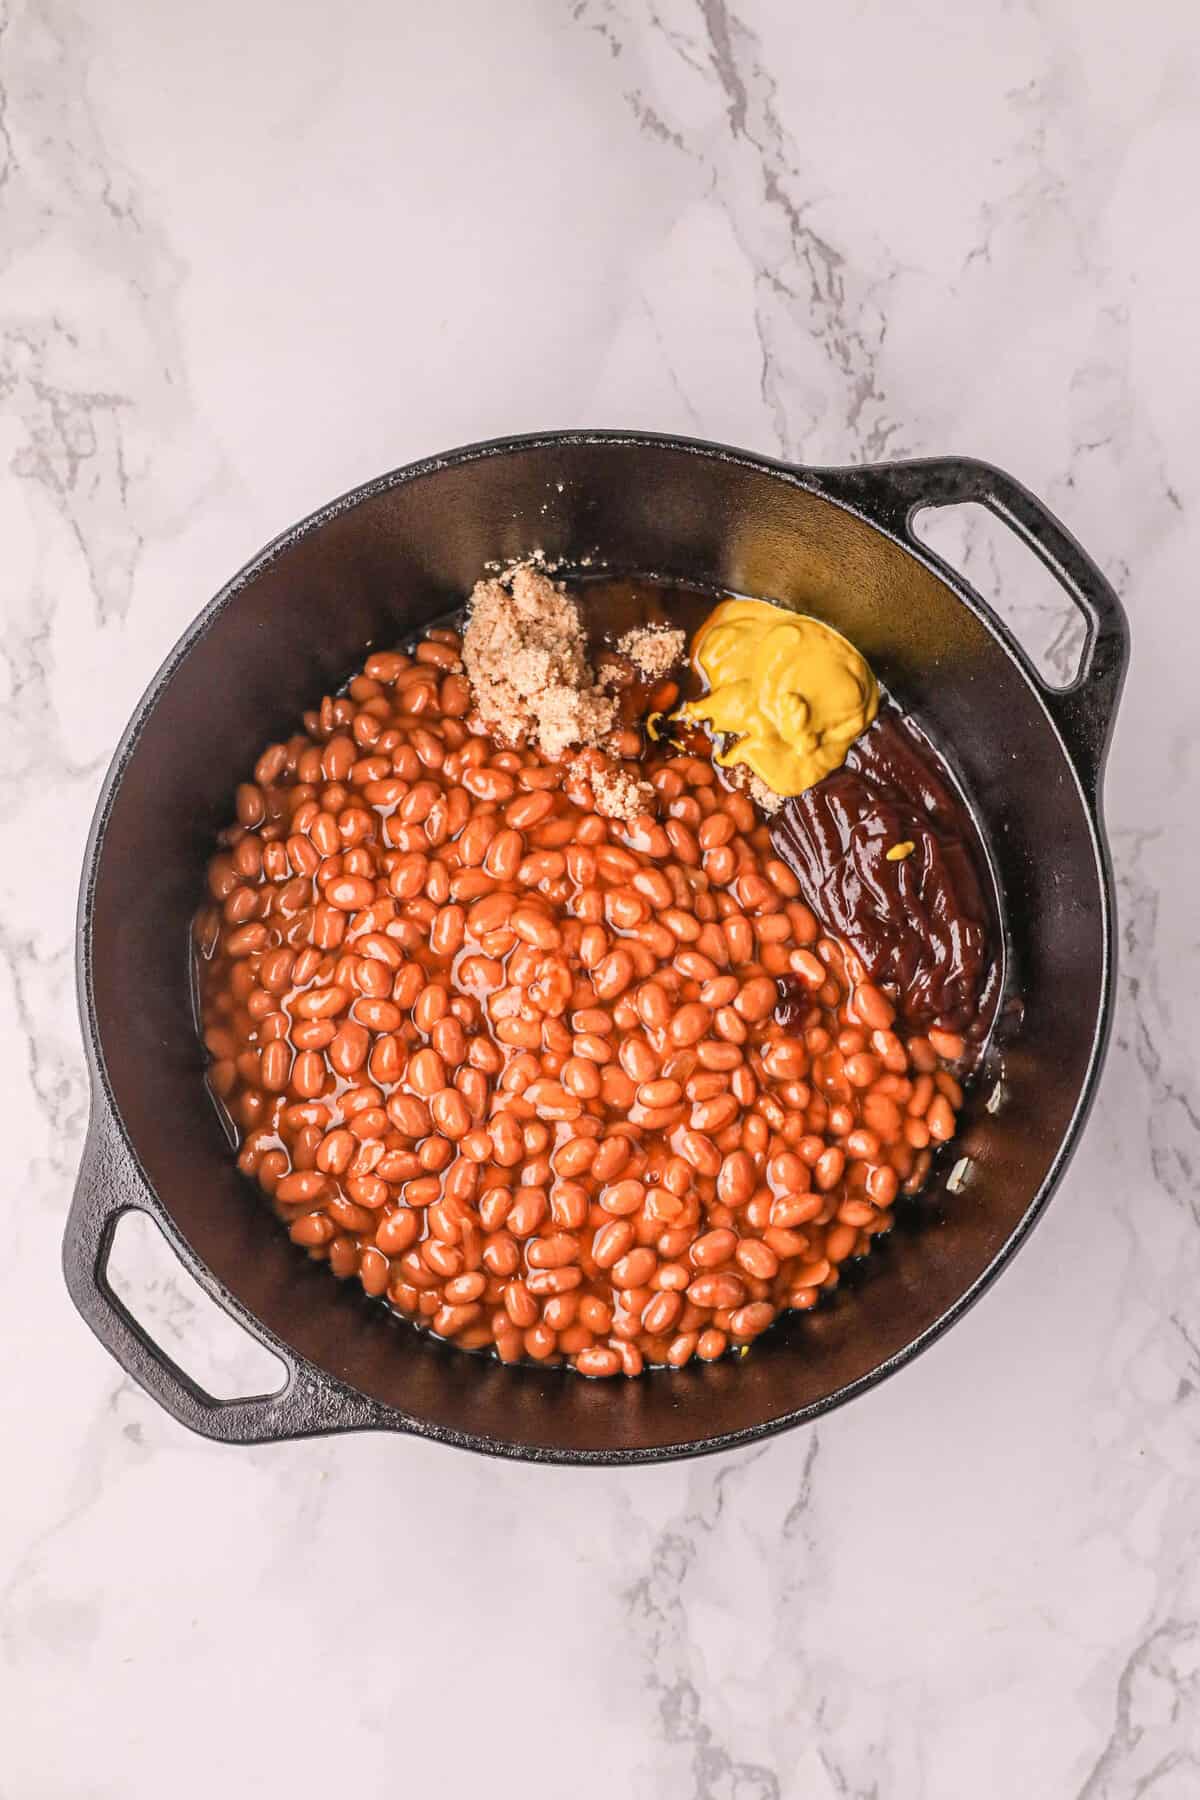 Adding remaining ingredients to cooked bacon for Smoked BBQ Beans in the dutch oven 